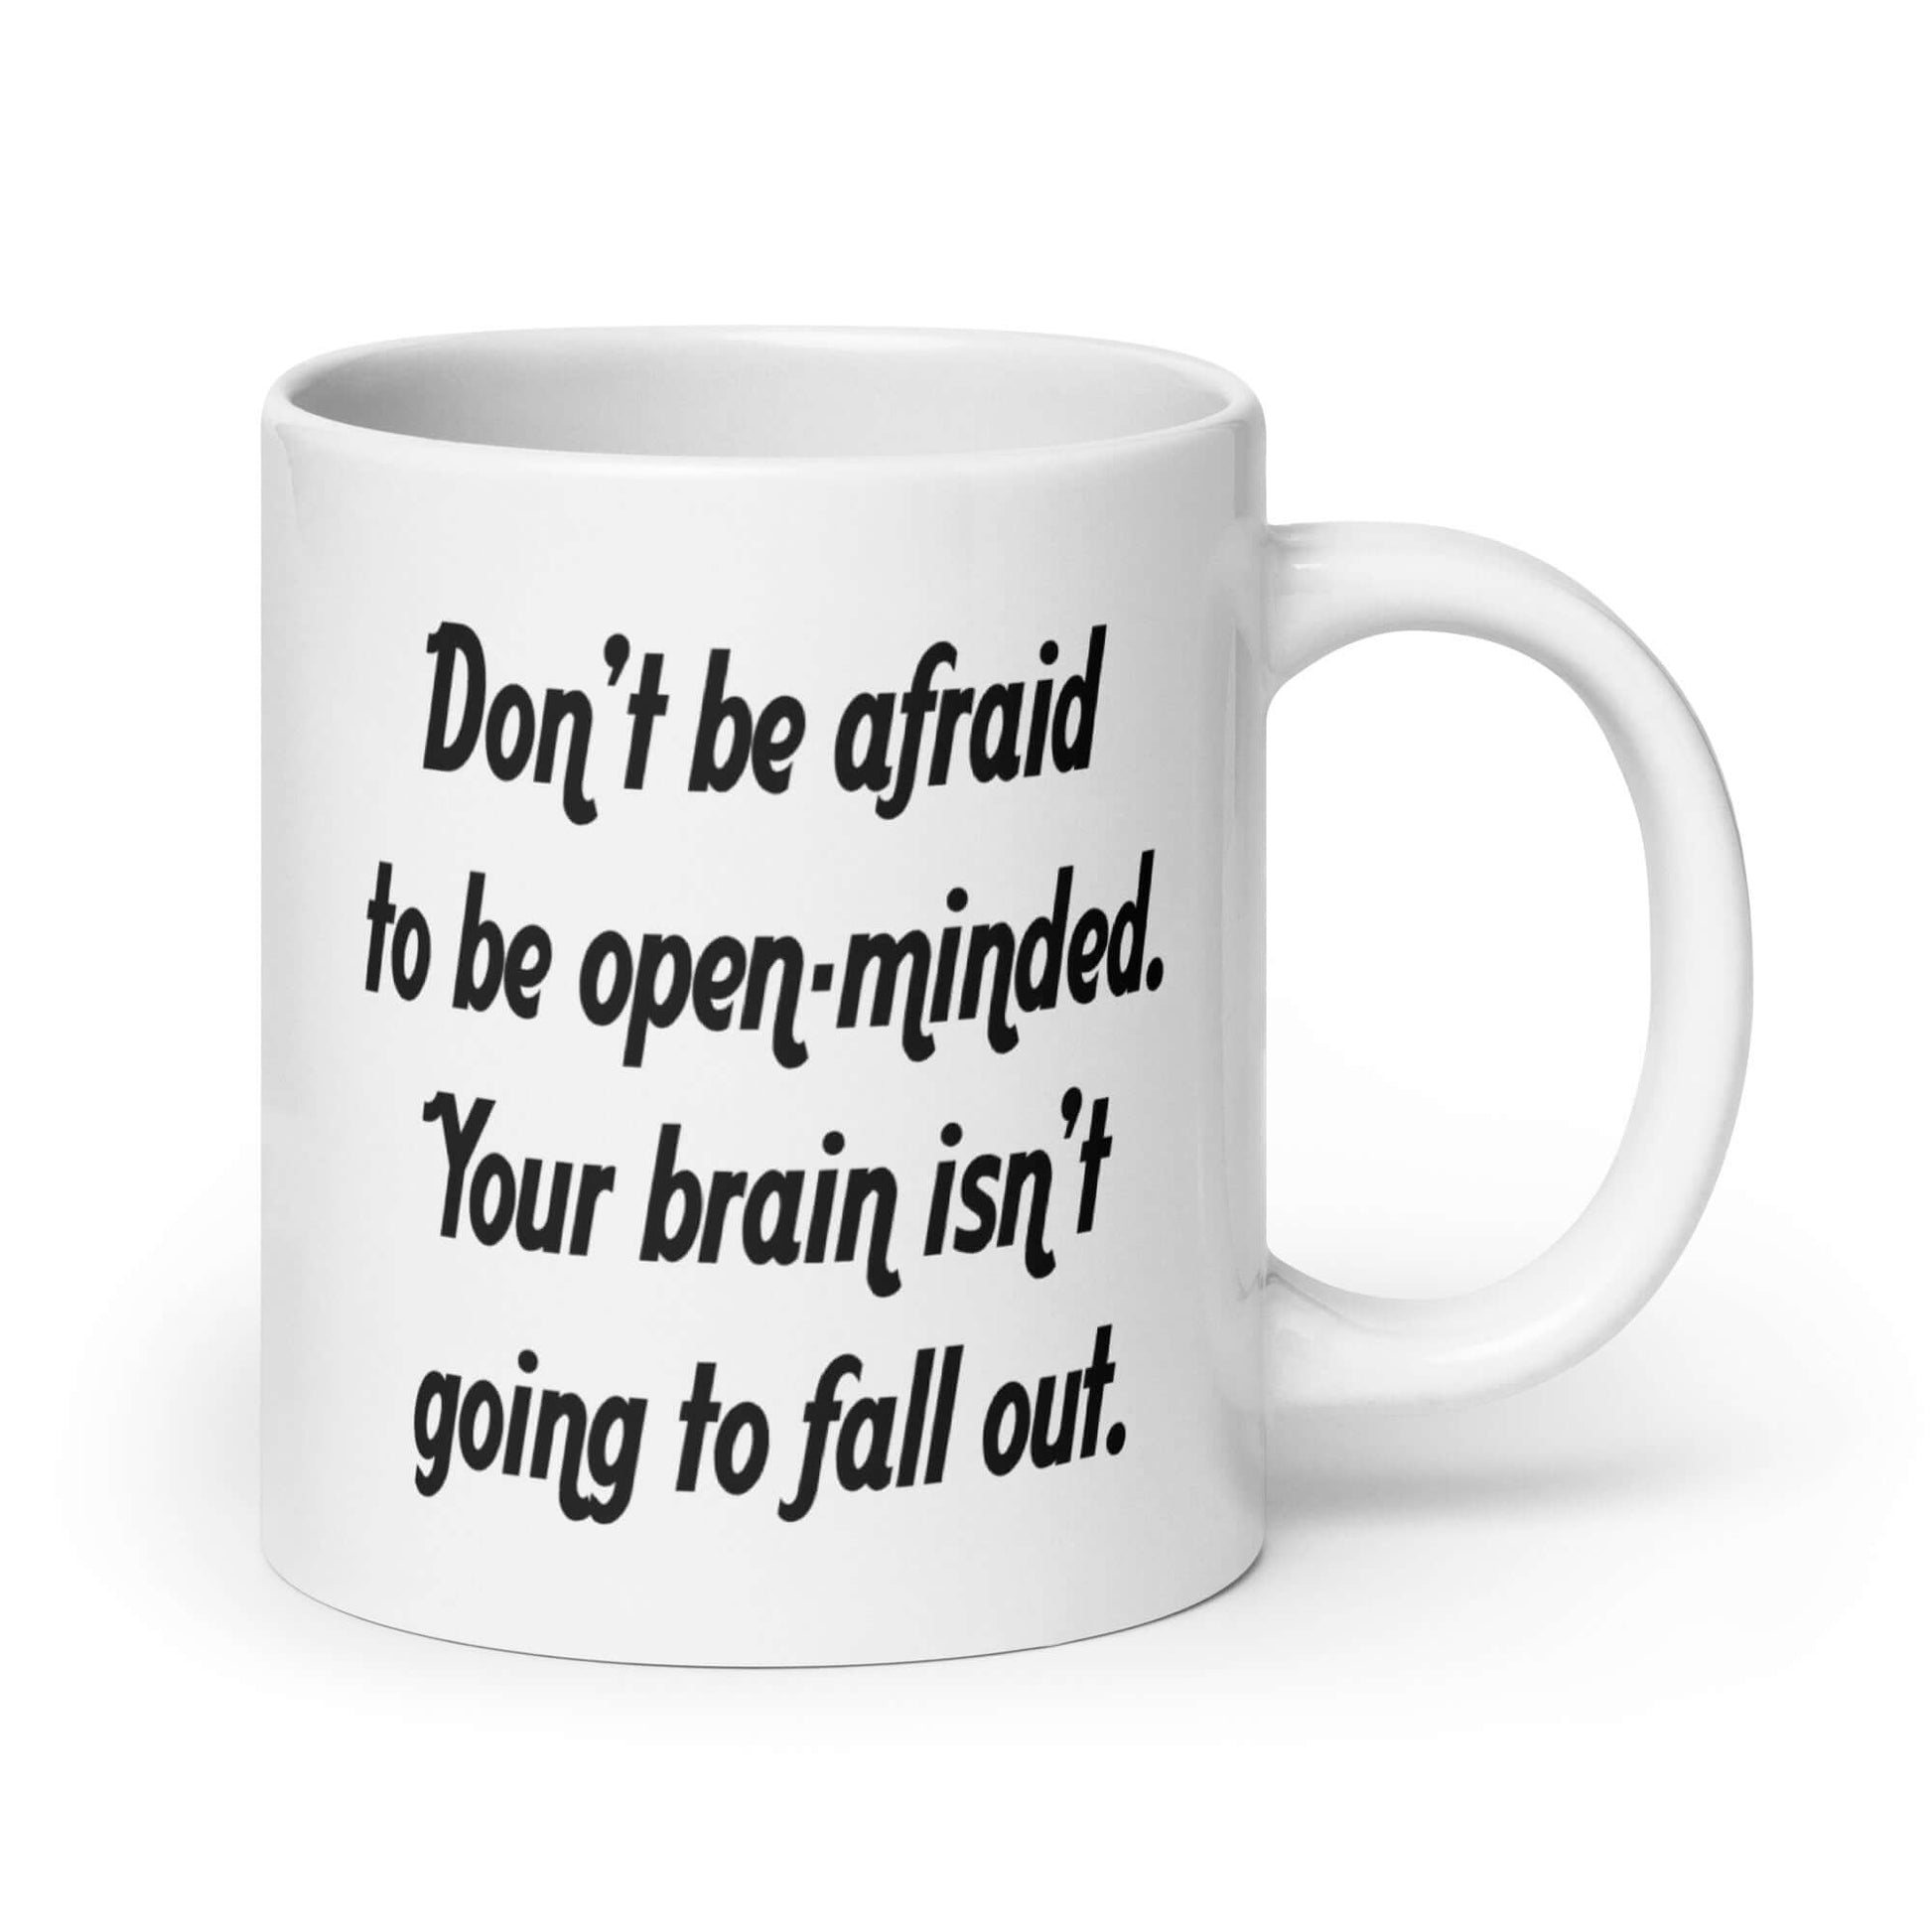 White ceramic coffee mug with the phrase Don't be afraid to be open-minded. Your brain isn't going to fall out printed on both sides of the mug.